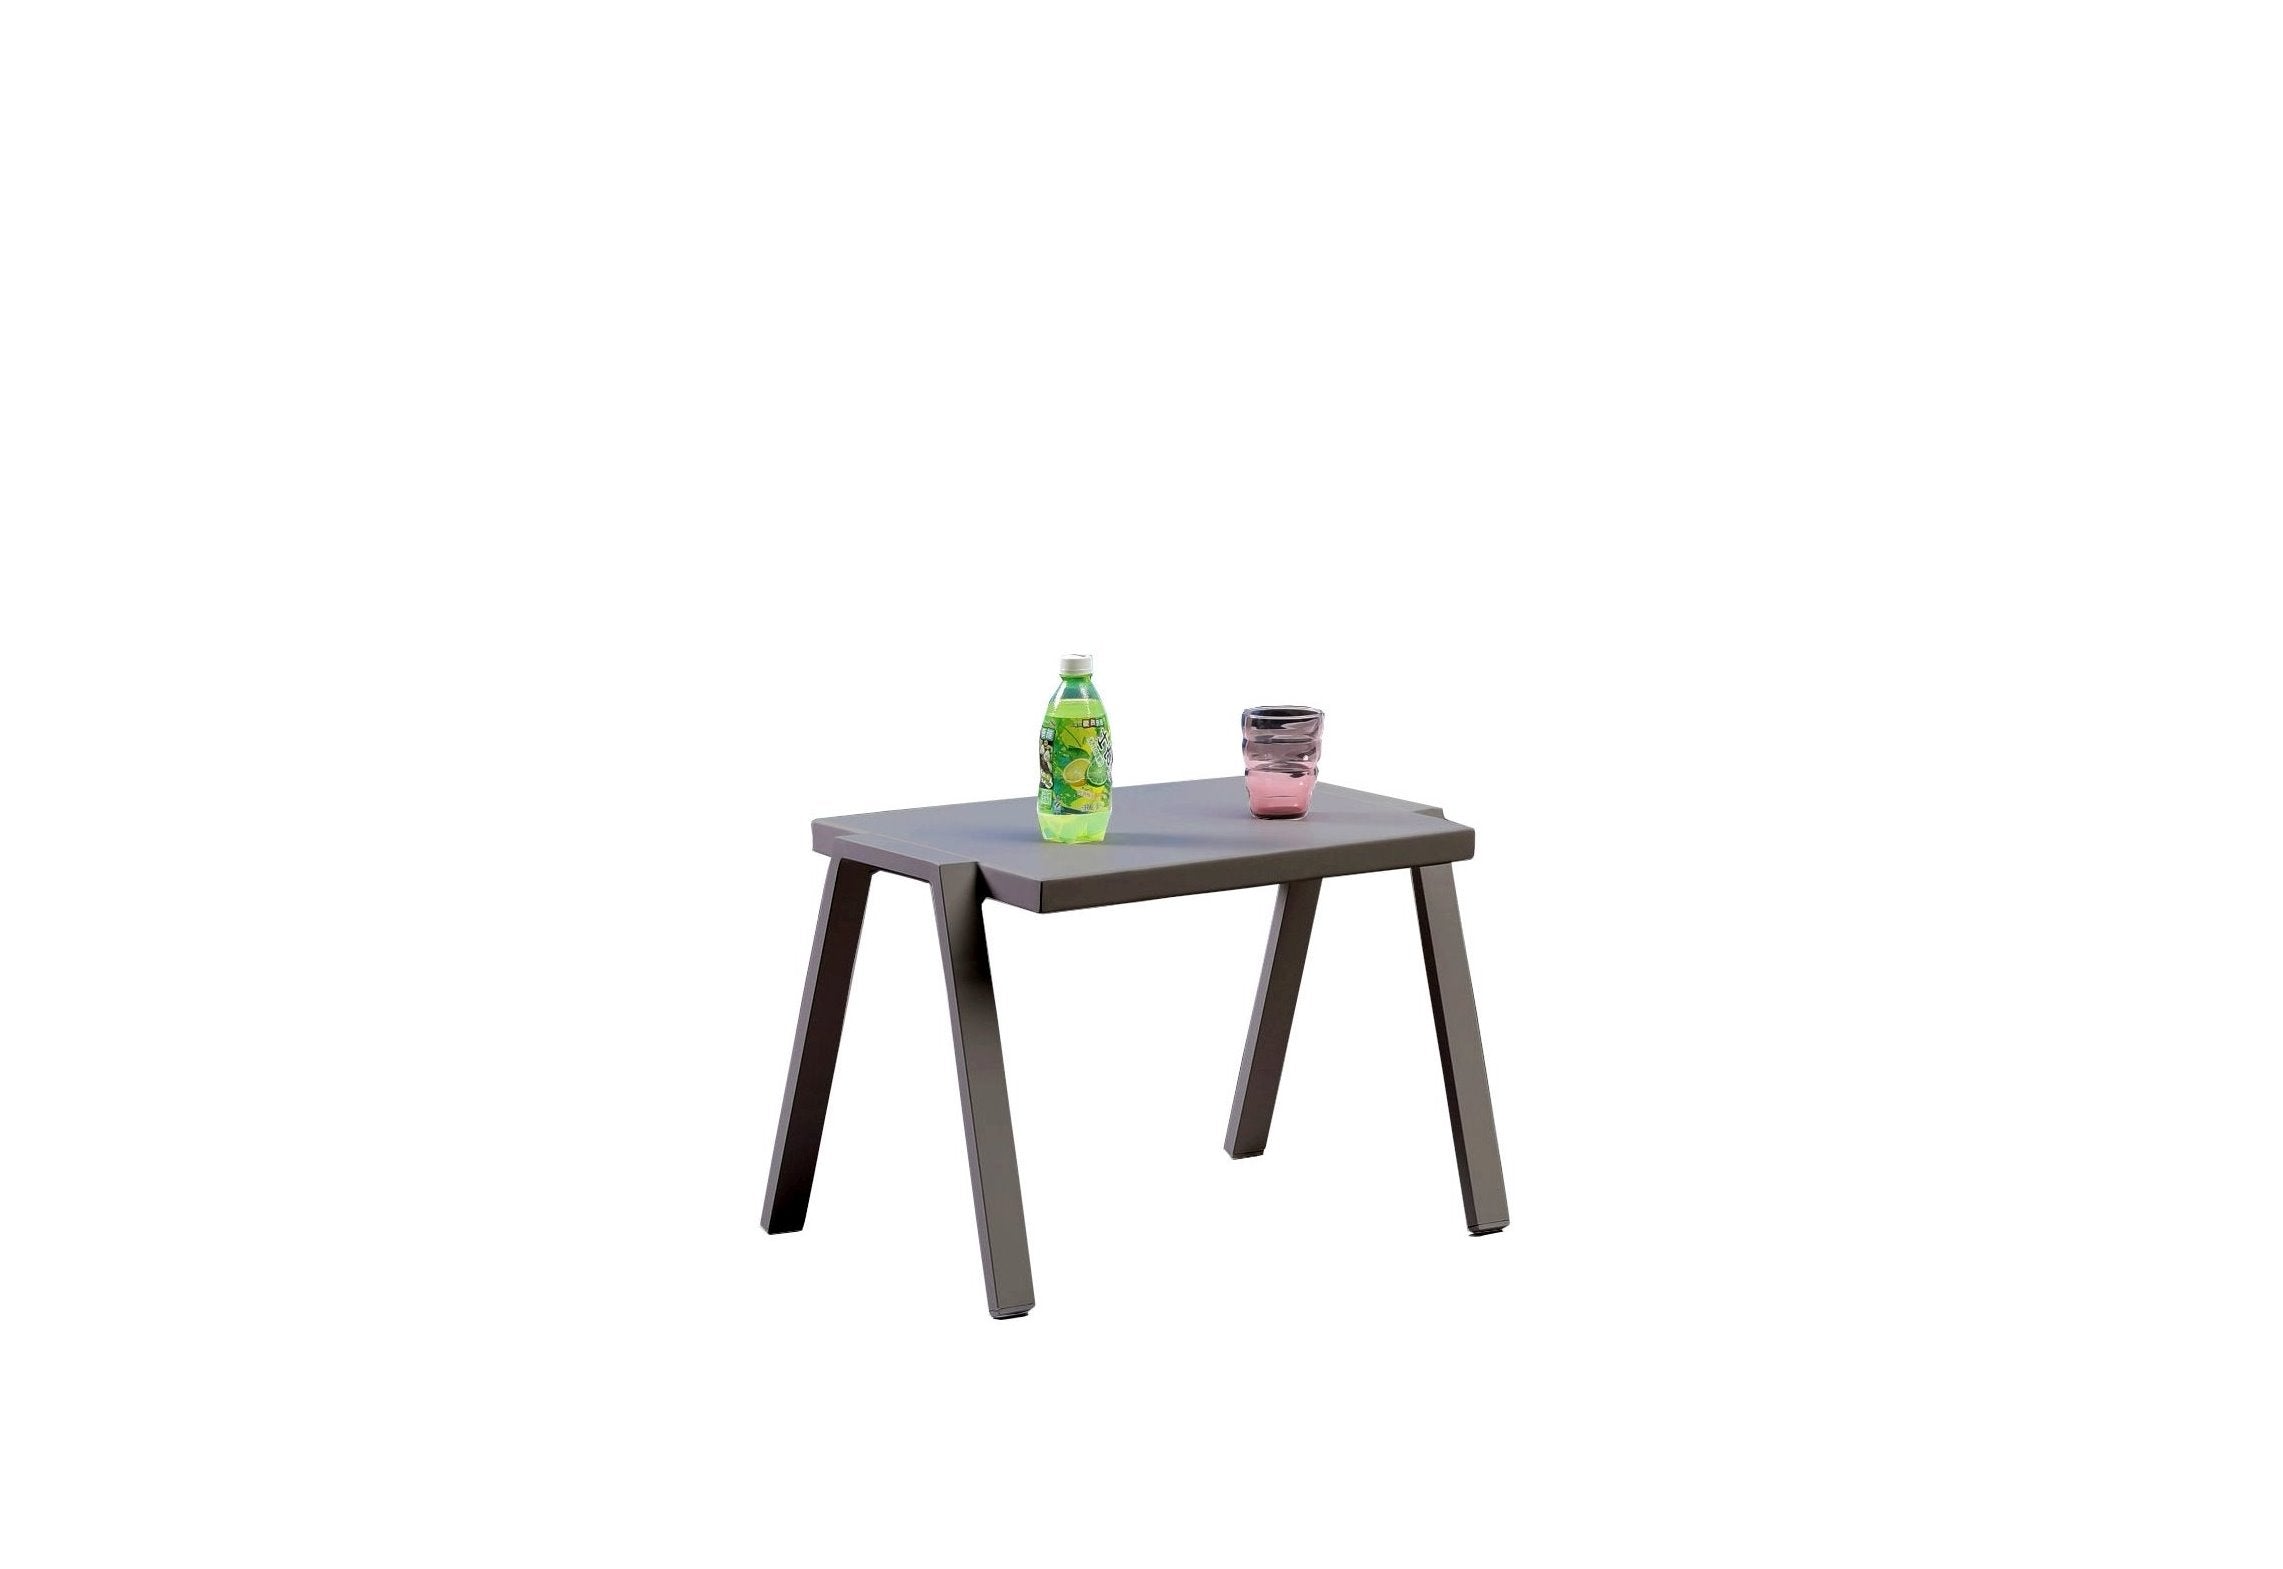 Rocco side table